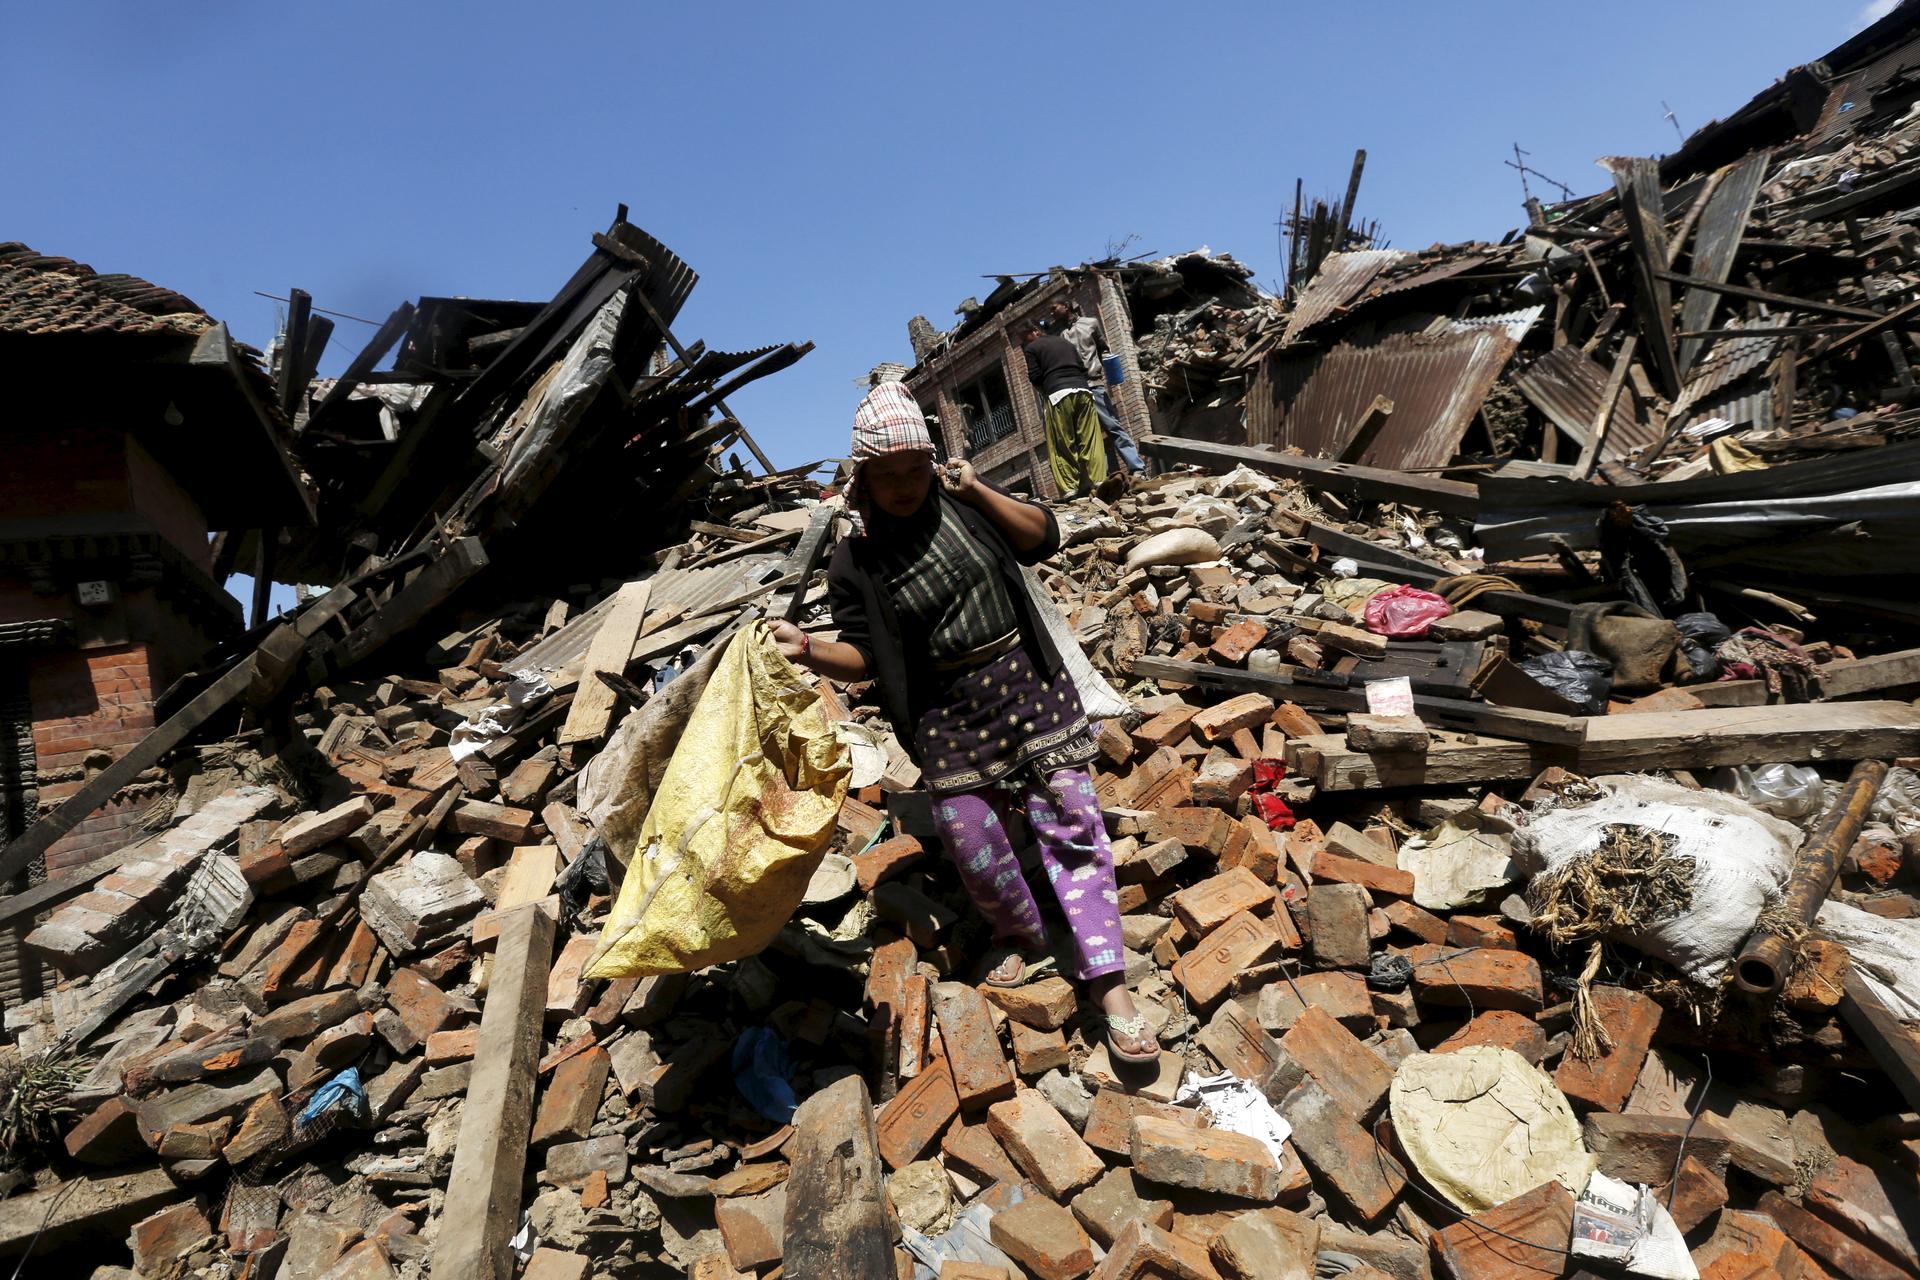 A woman carries her belongings as she walks over a collapsed house in Bhaktapur, Nepal, on April 27, 2015.